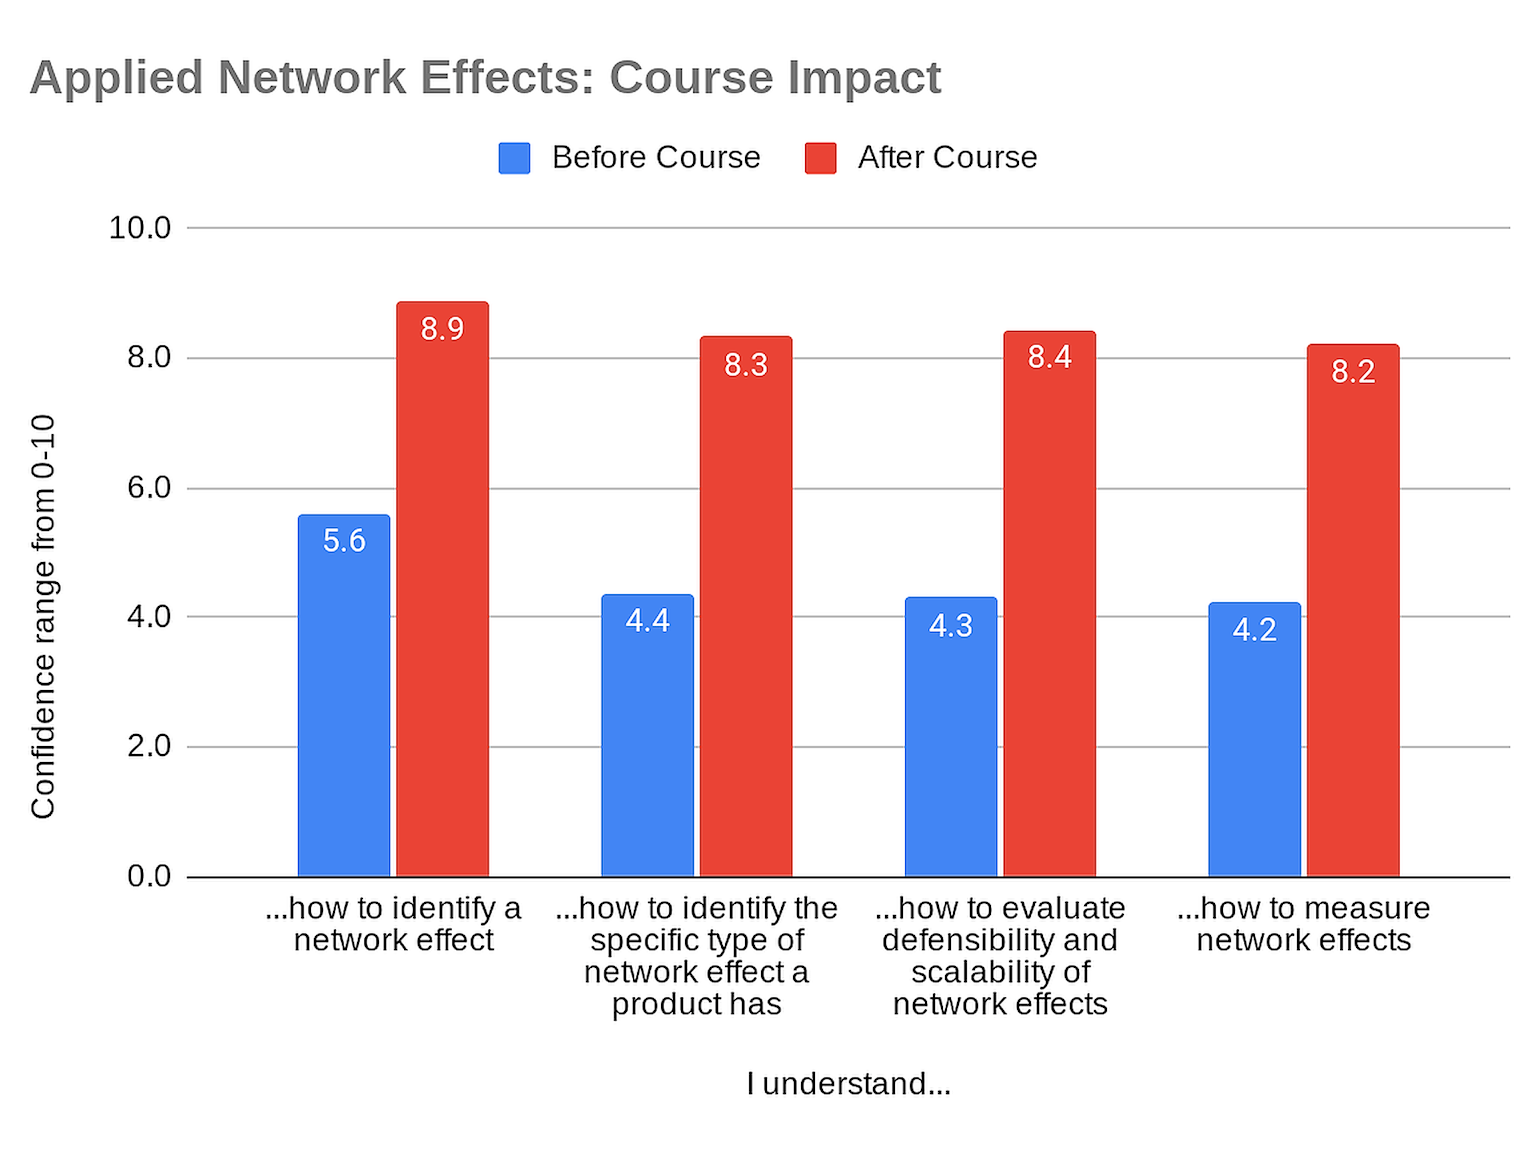 Participants saw marked improvements in their ability to identify, assess & measure network effects.